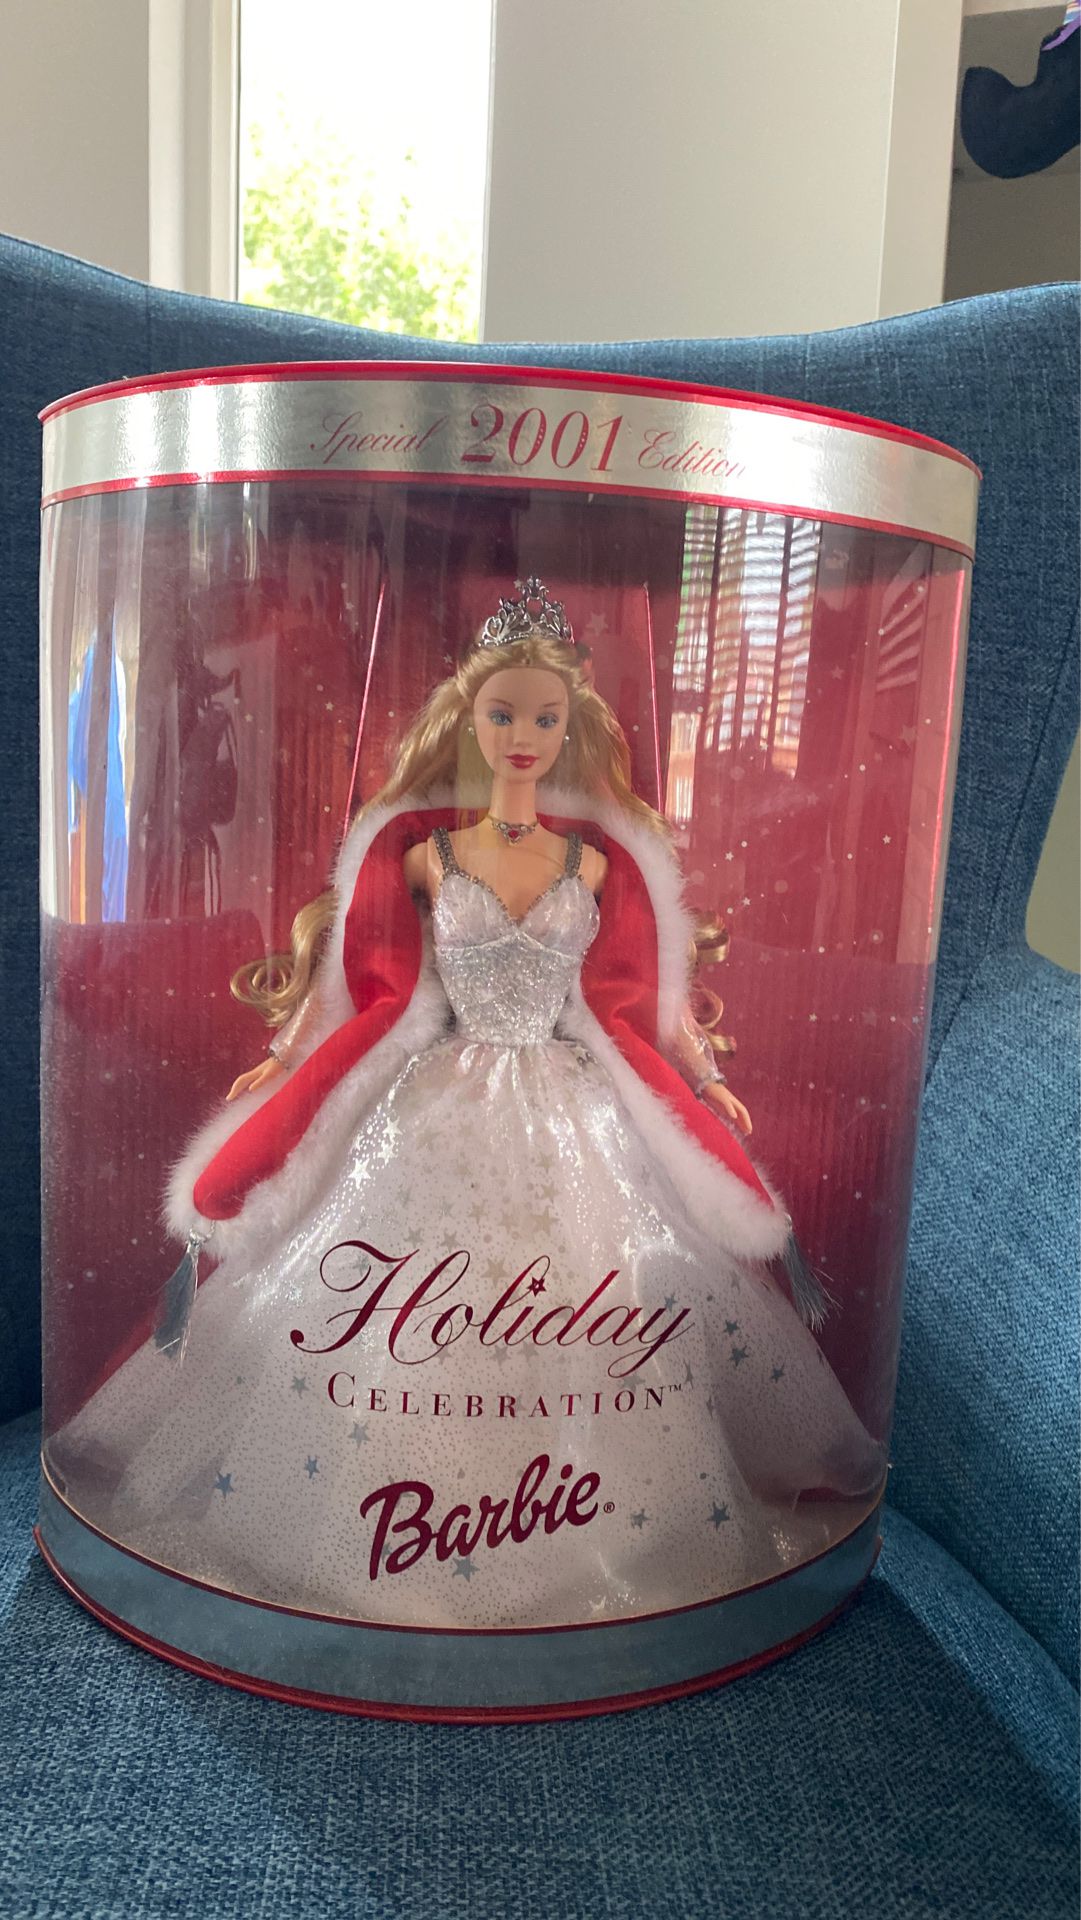 2001 Holiday Celebration Barbie- Great for Christmas!